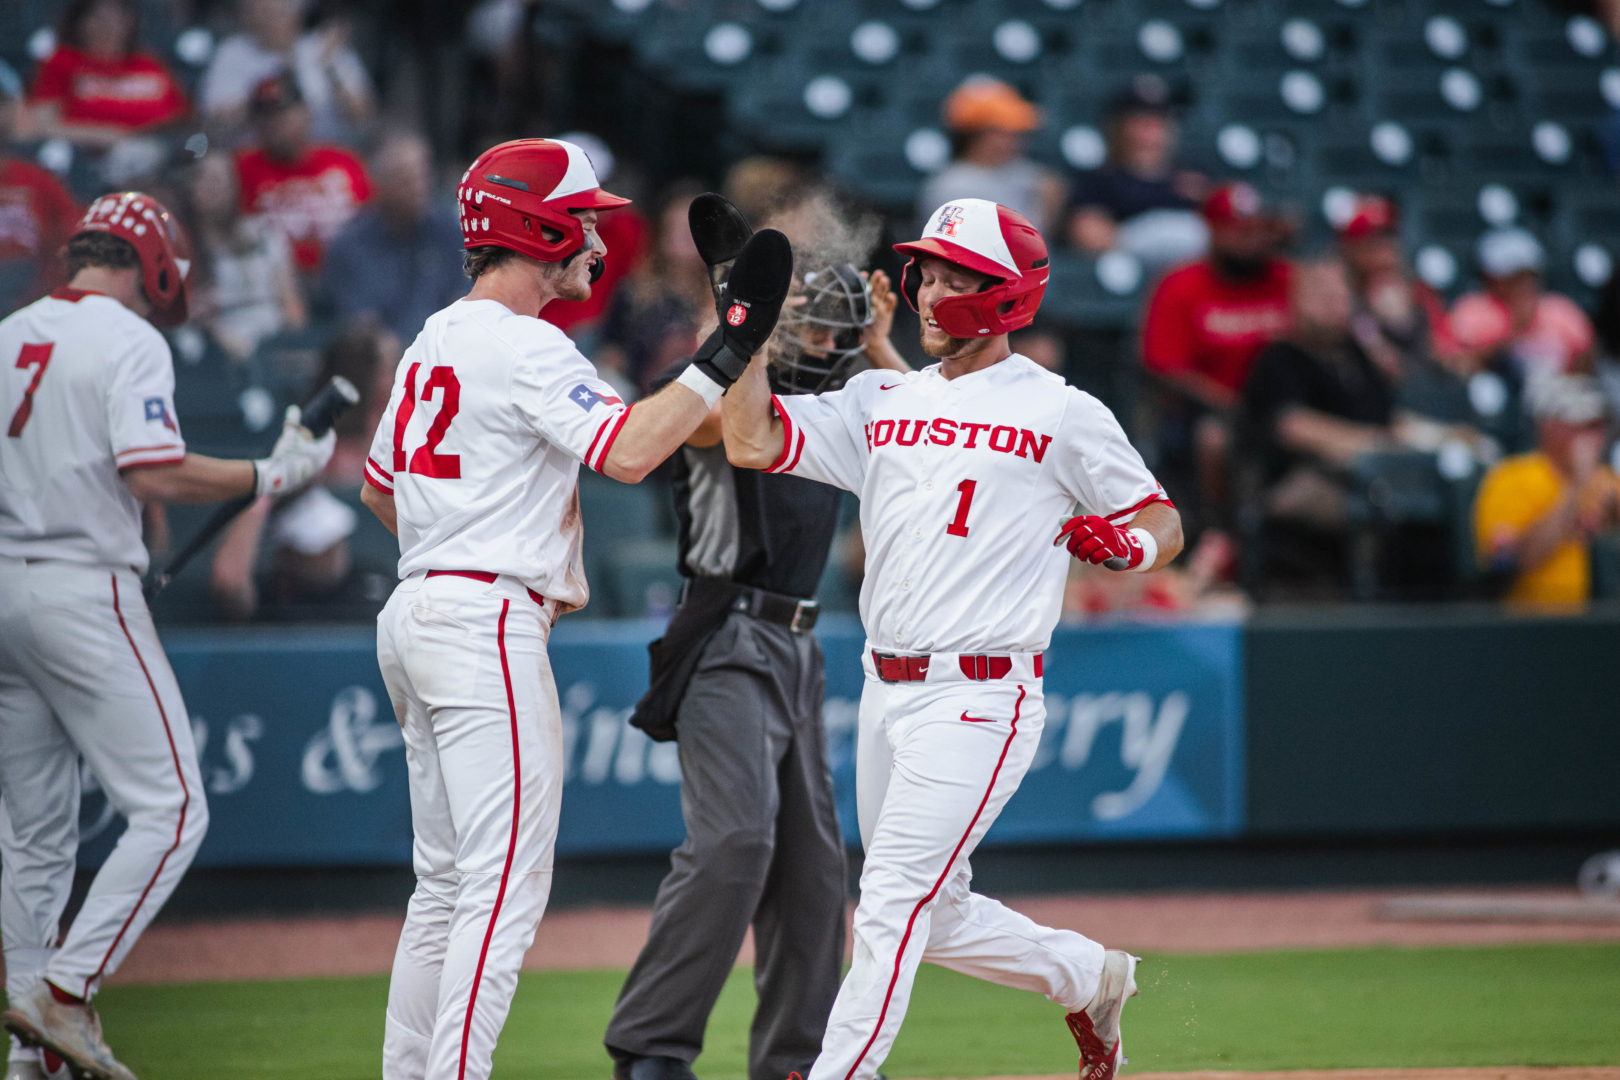 Ian McMillian greets Brandon Burckel after the pair scored off Brandon Uhse's RBI single in the bottom of the fourth during UH baseball's win over Sam Houston on Tuesday night. | James Schillinger/The Cougar